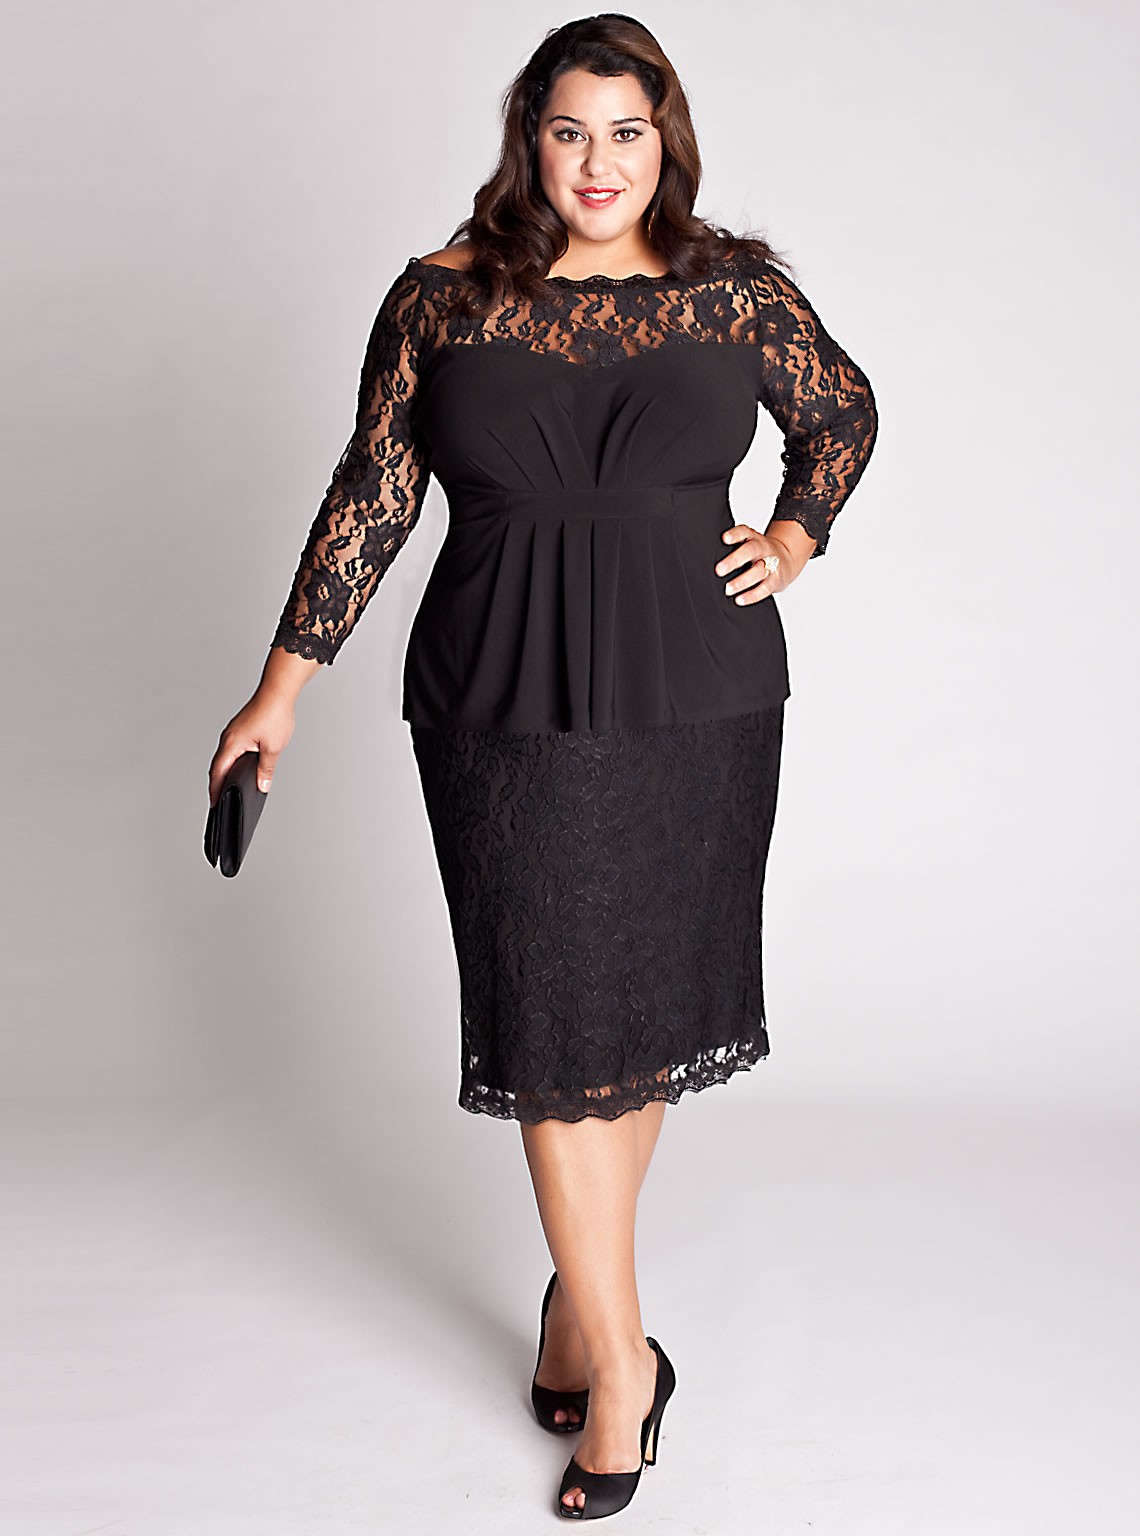 Plus Size Dresses Night Out And Popular Styles 2017